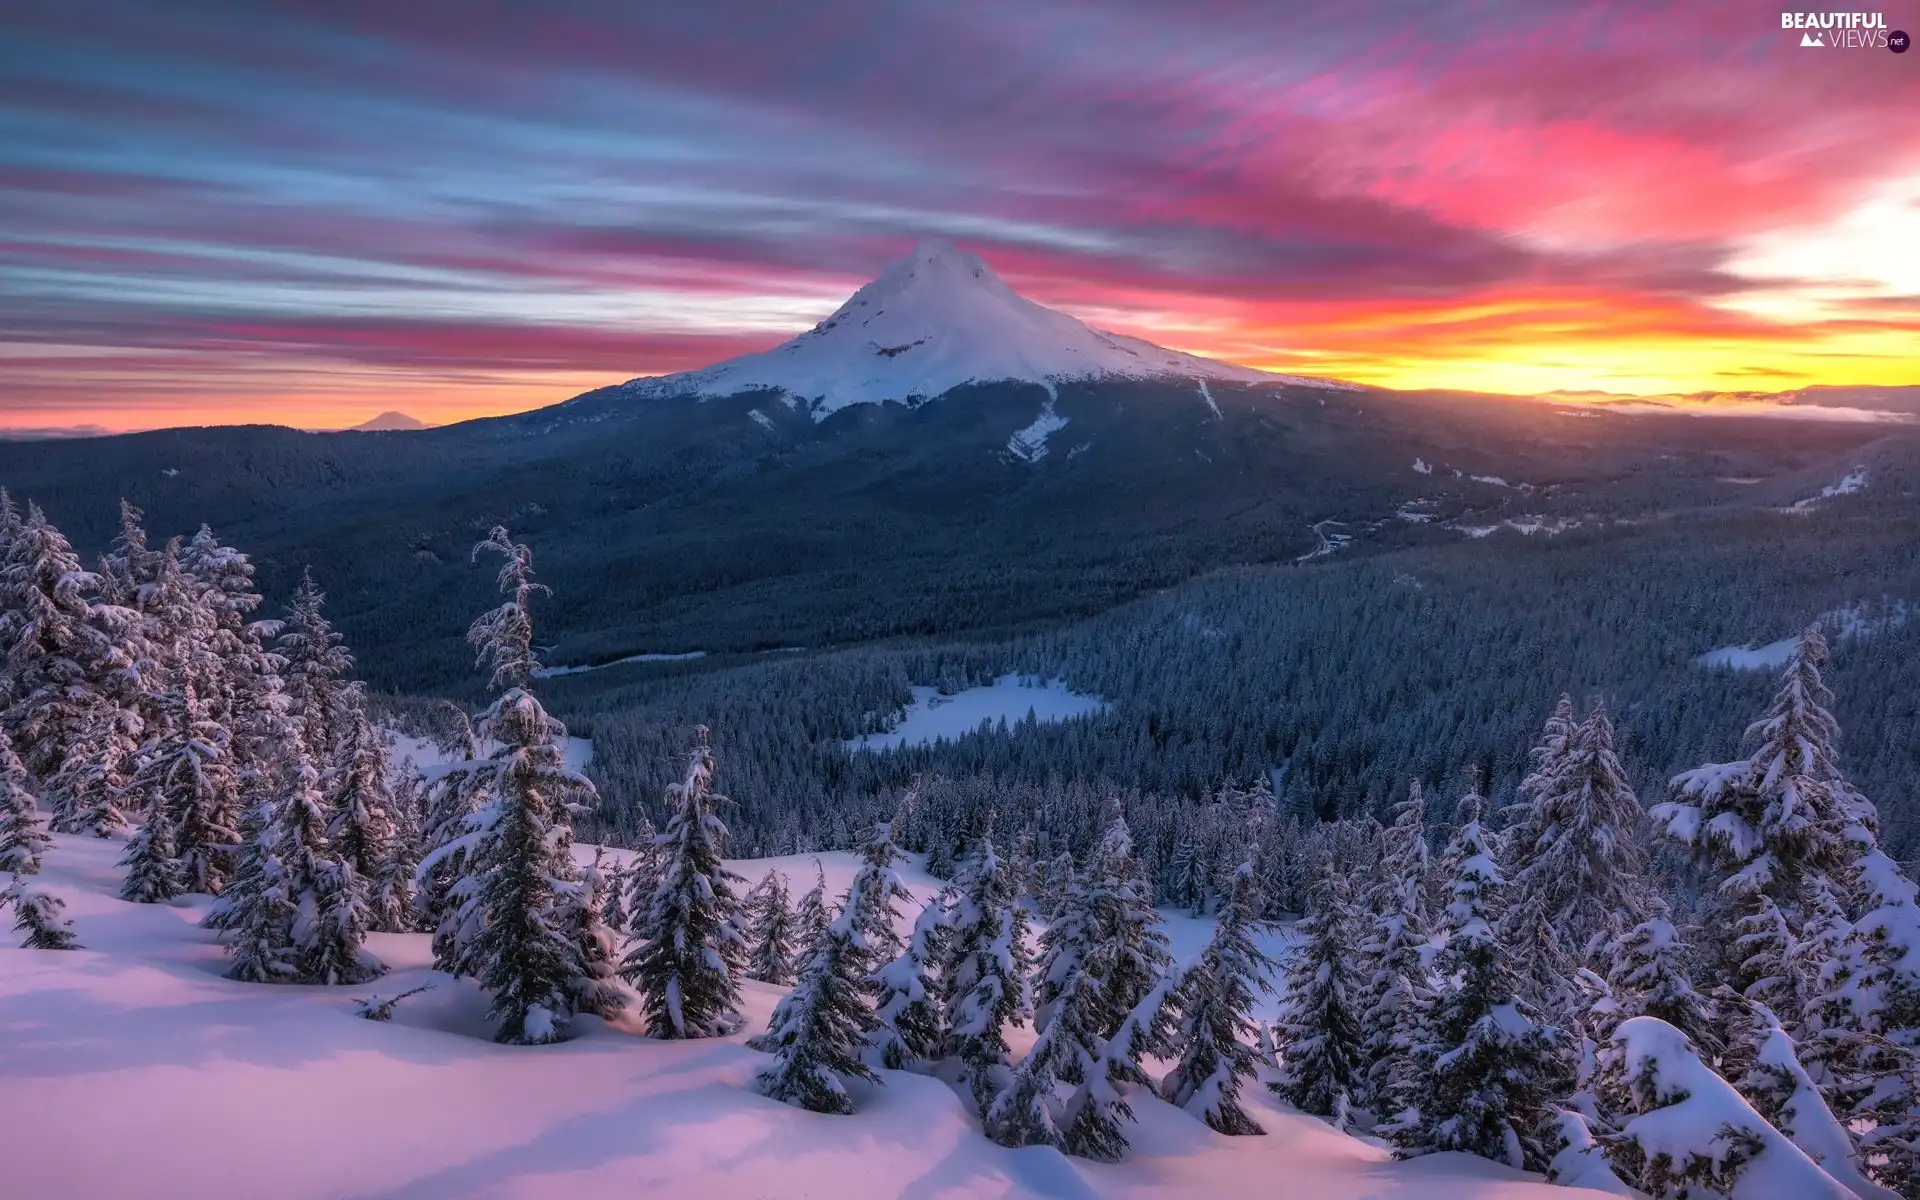 mountains, The United States, winter, Tom Dick and Harry Mountain, trees, Great Sunsets, mountains, Clackamas County, State of Oregon, viewes, forest